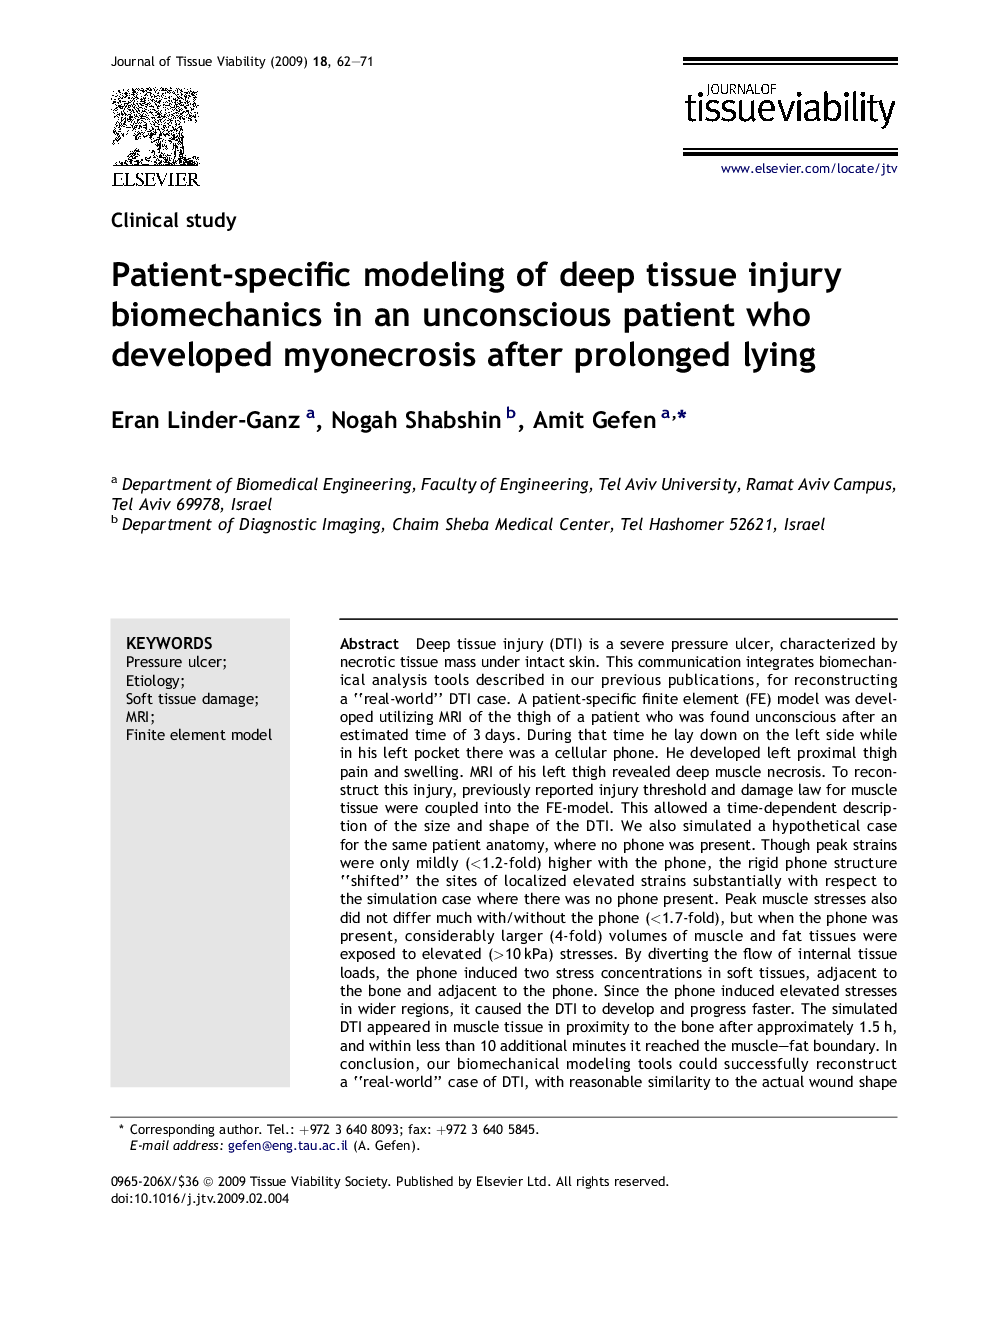 Patient-specific modeling of deep tissue injury biomechanics in an unconscious patient who developed myonecrosis after prolonged lying